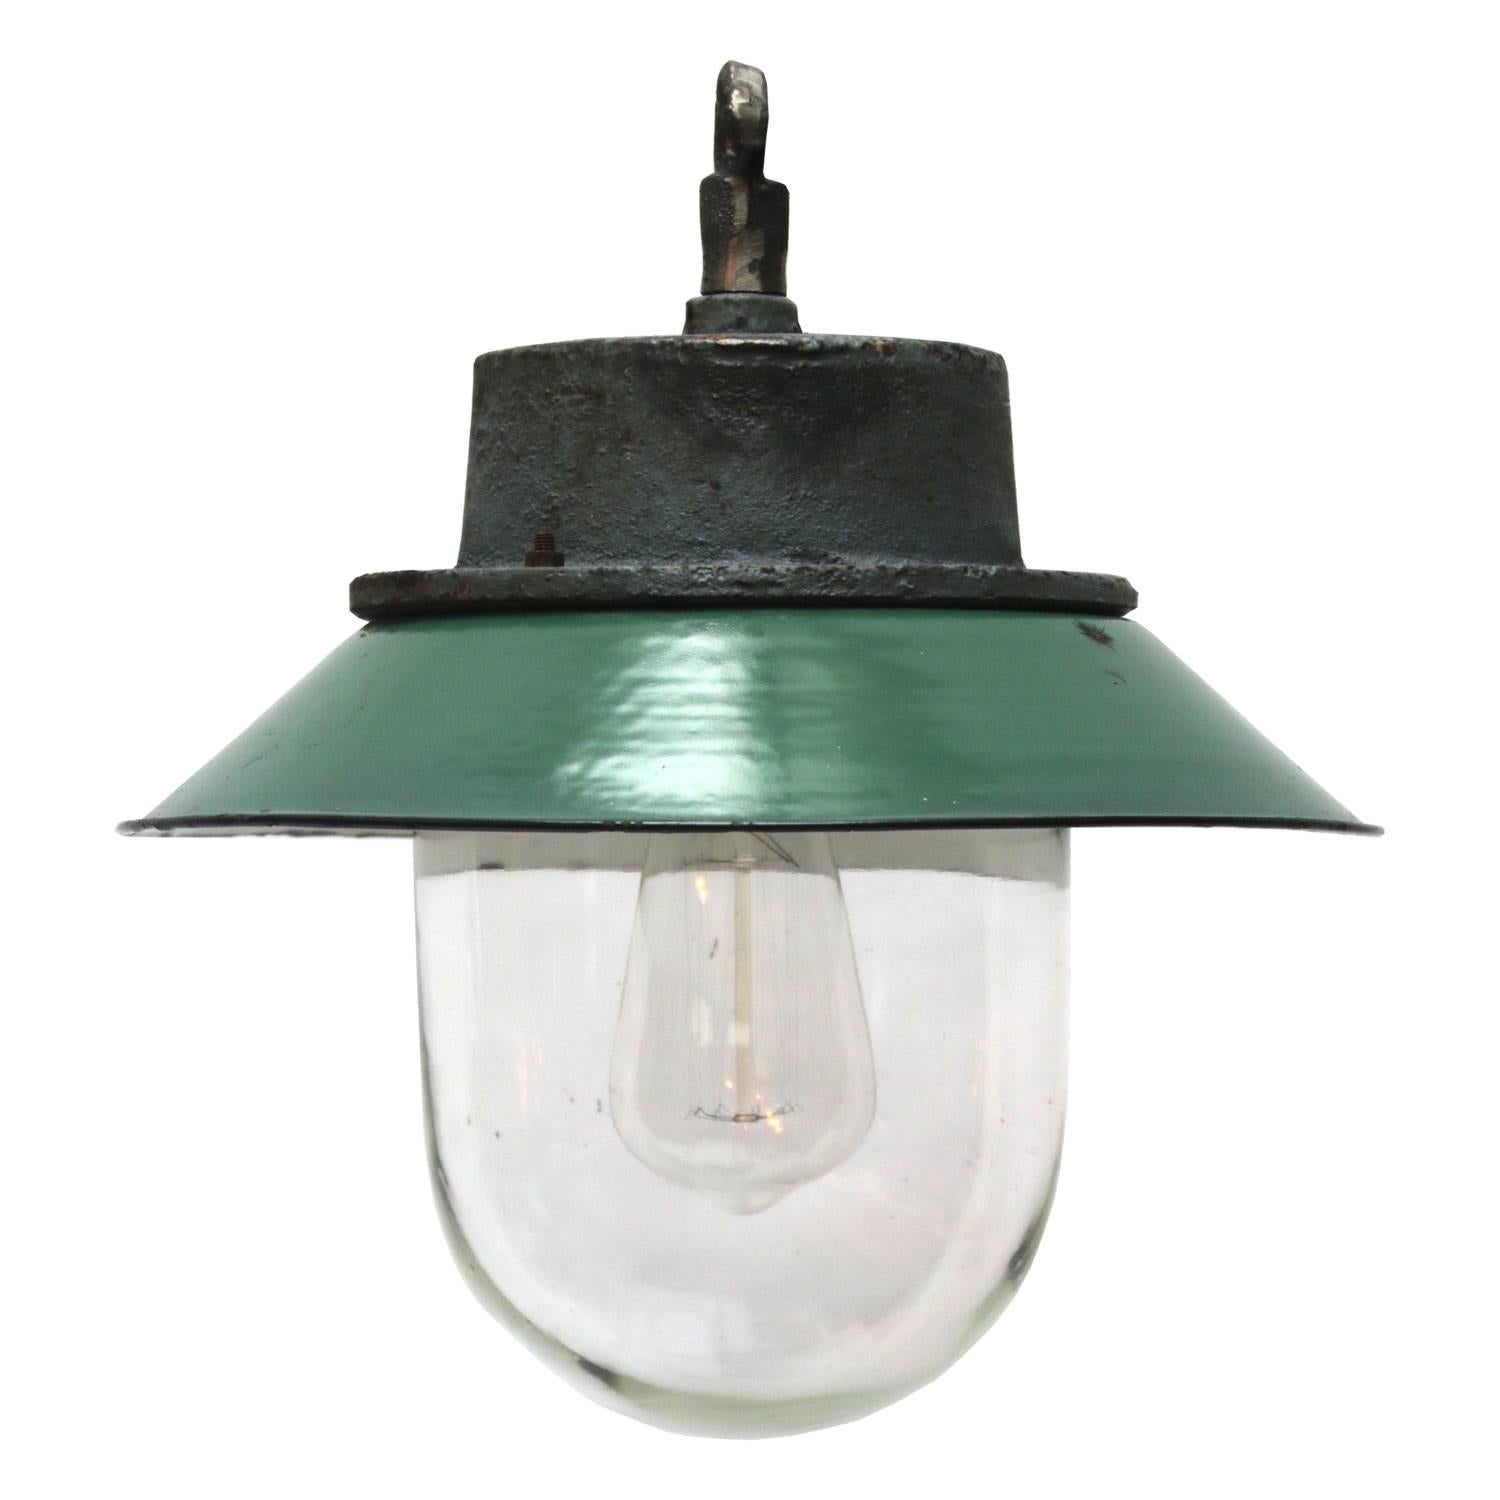 Petrol green/blue enamel. White interior.
Cast iron top. Clear glass.

Weight: 5.0 kg / 11 lb

Priced individual item. All lamps have been made suitable by international standards for incandescent light bulbs, energy-efficient and LED bulbs. E26/E27